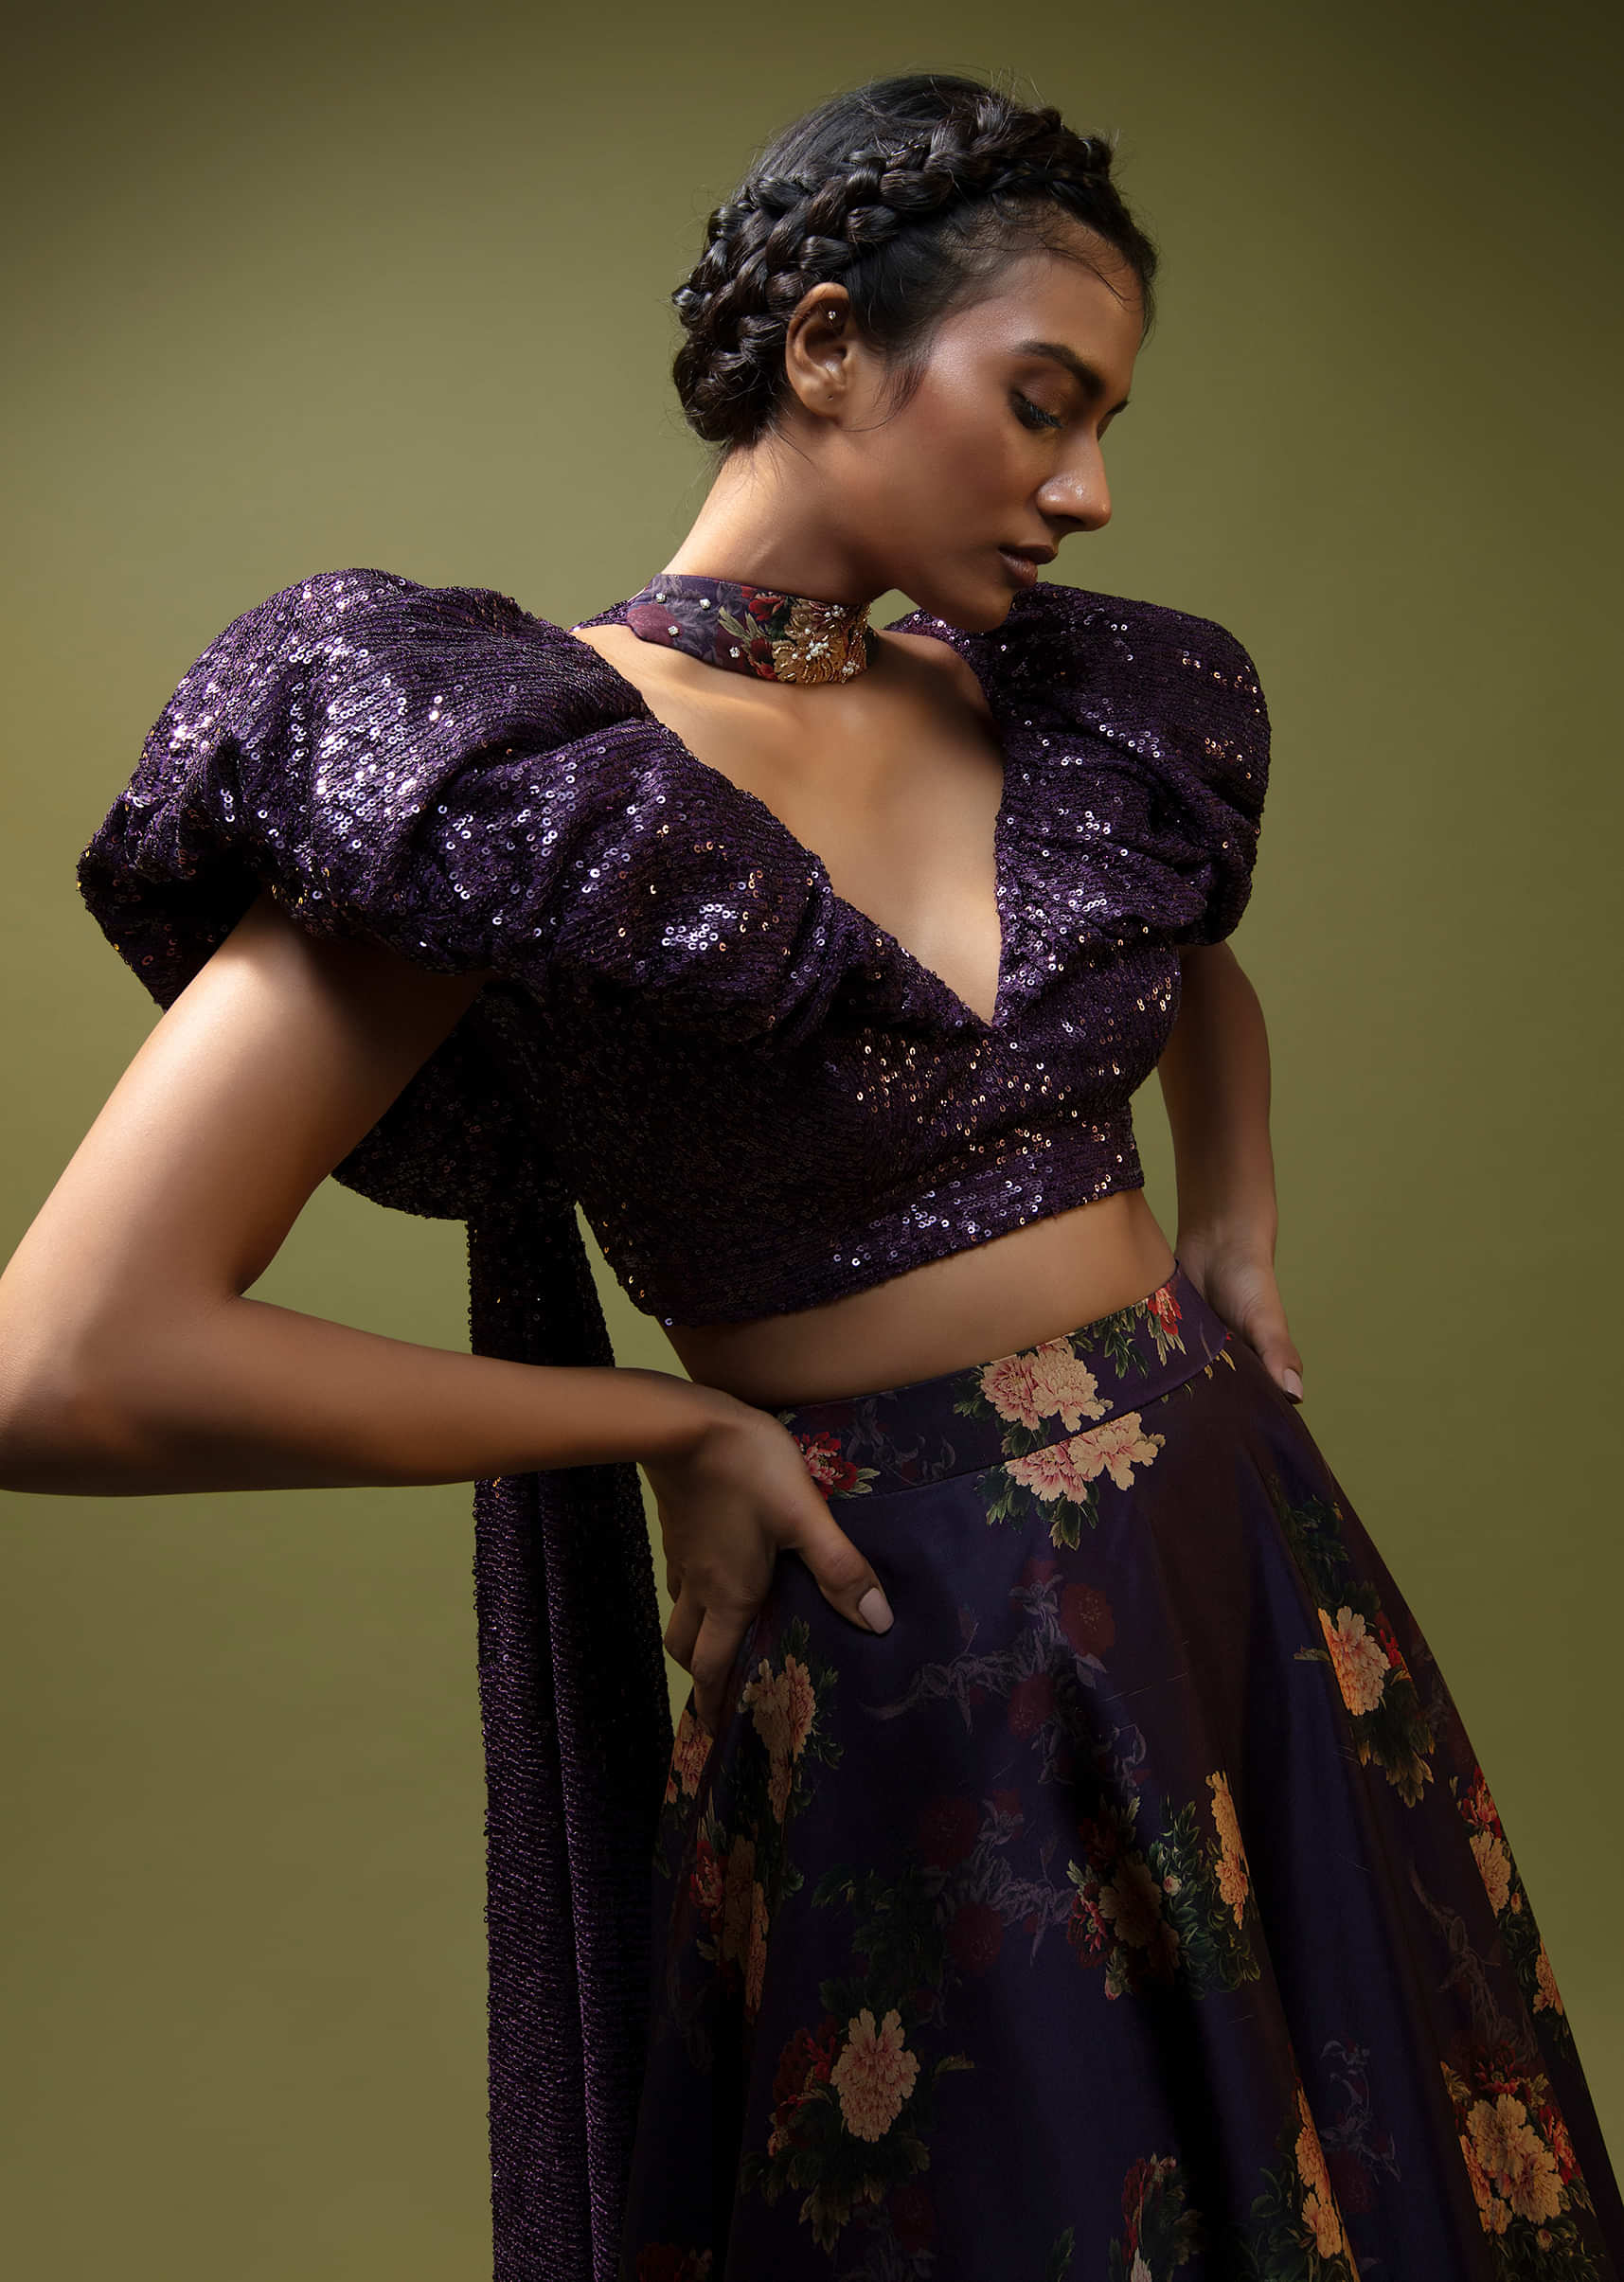 Jewel Purple Lehenga In Floral Printed Satin With A Sequins Crop Top Designed With An Elaborate Puff On The Shoulder And Neckline 